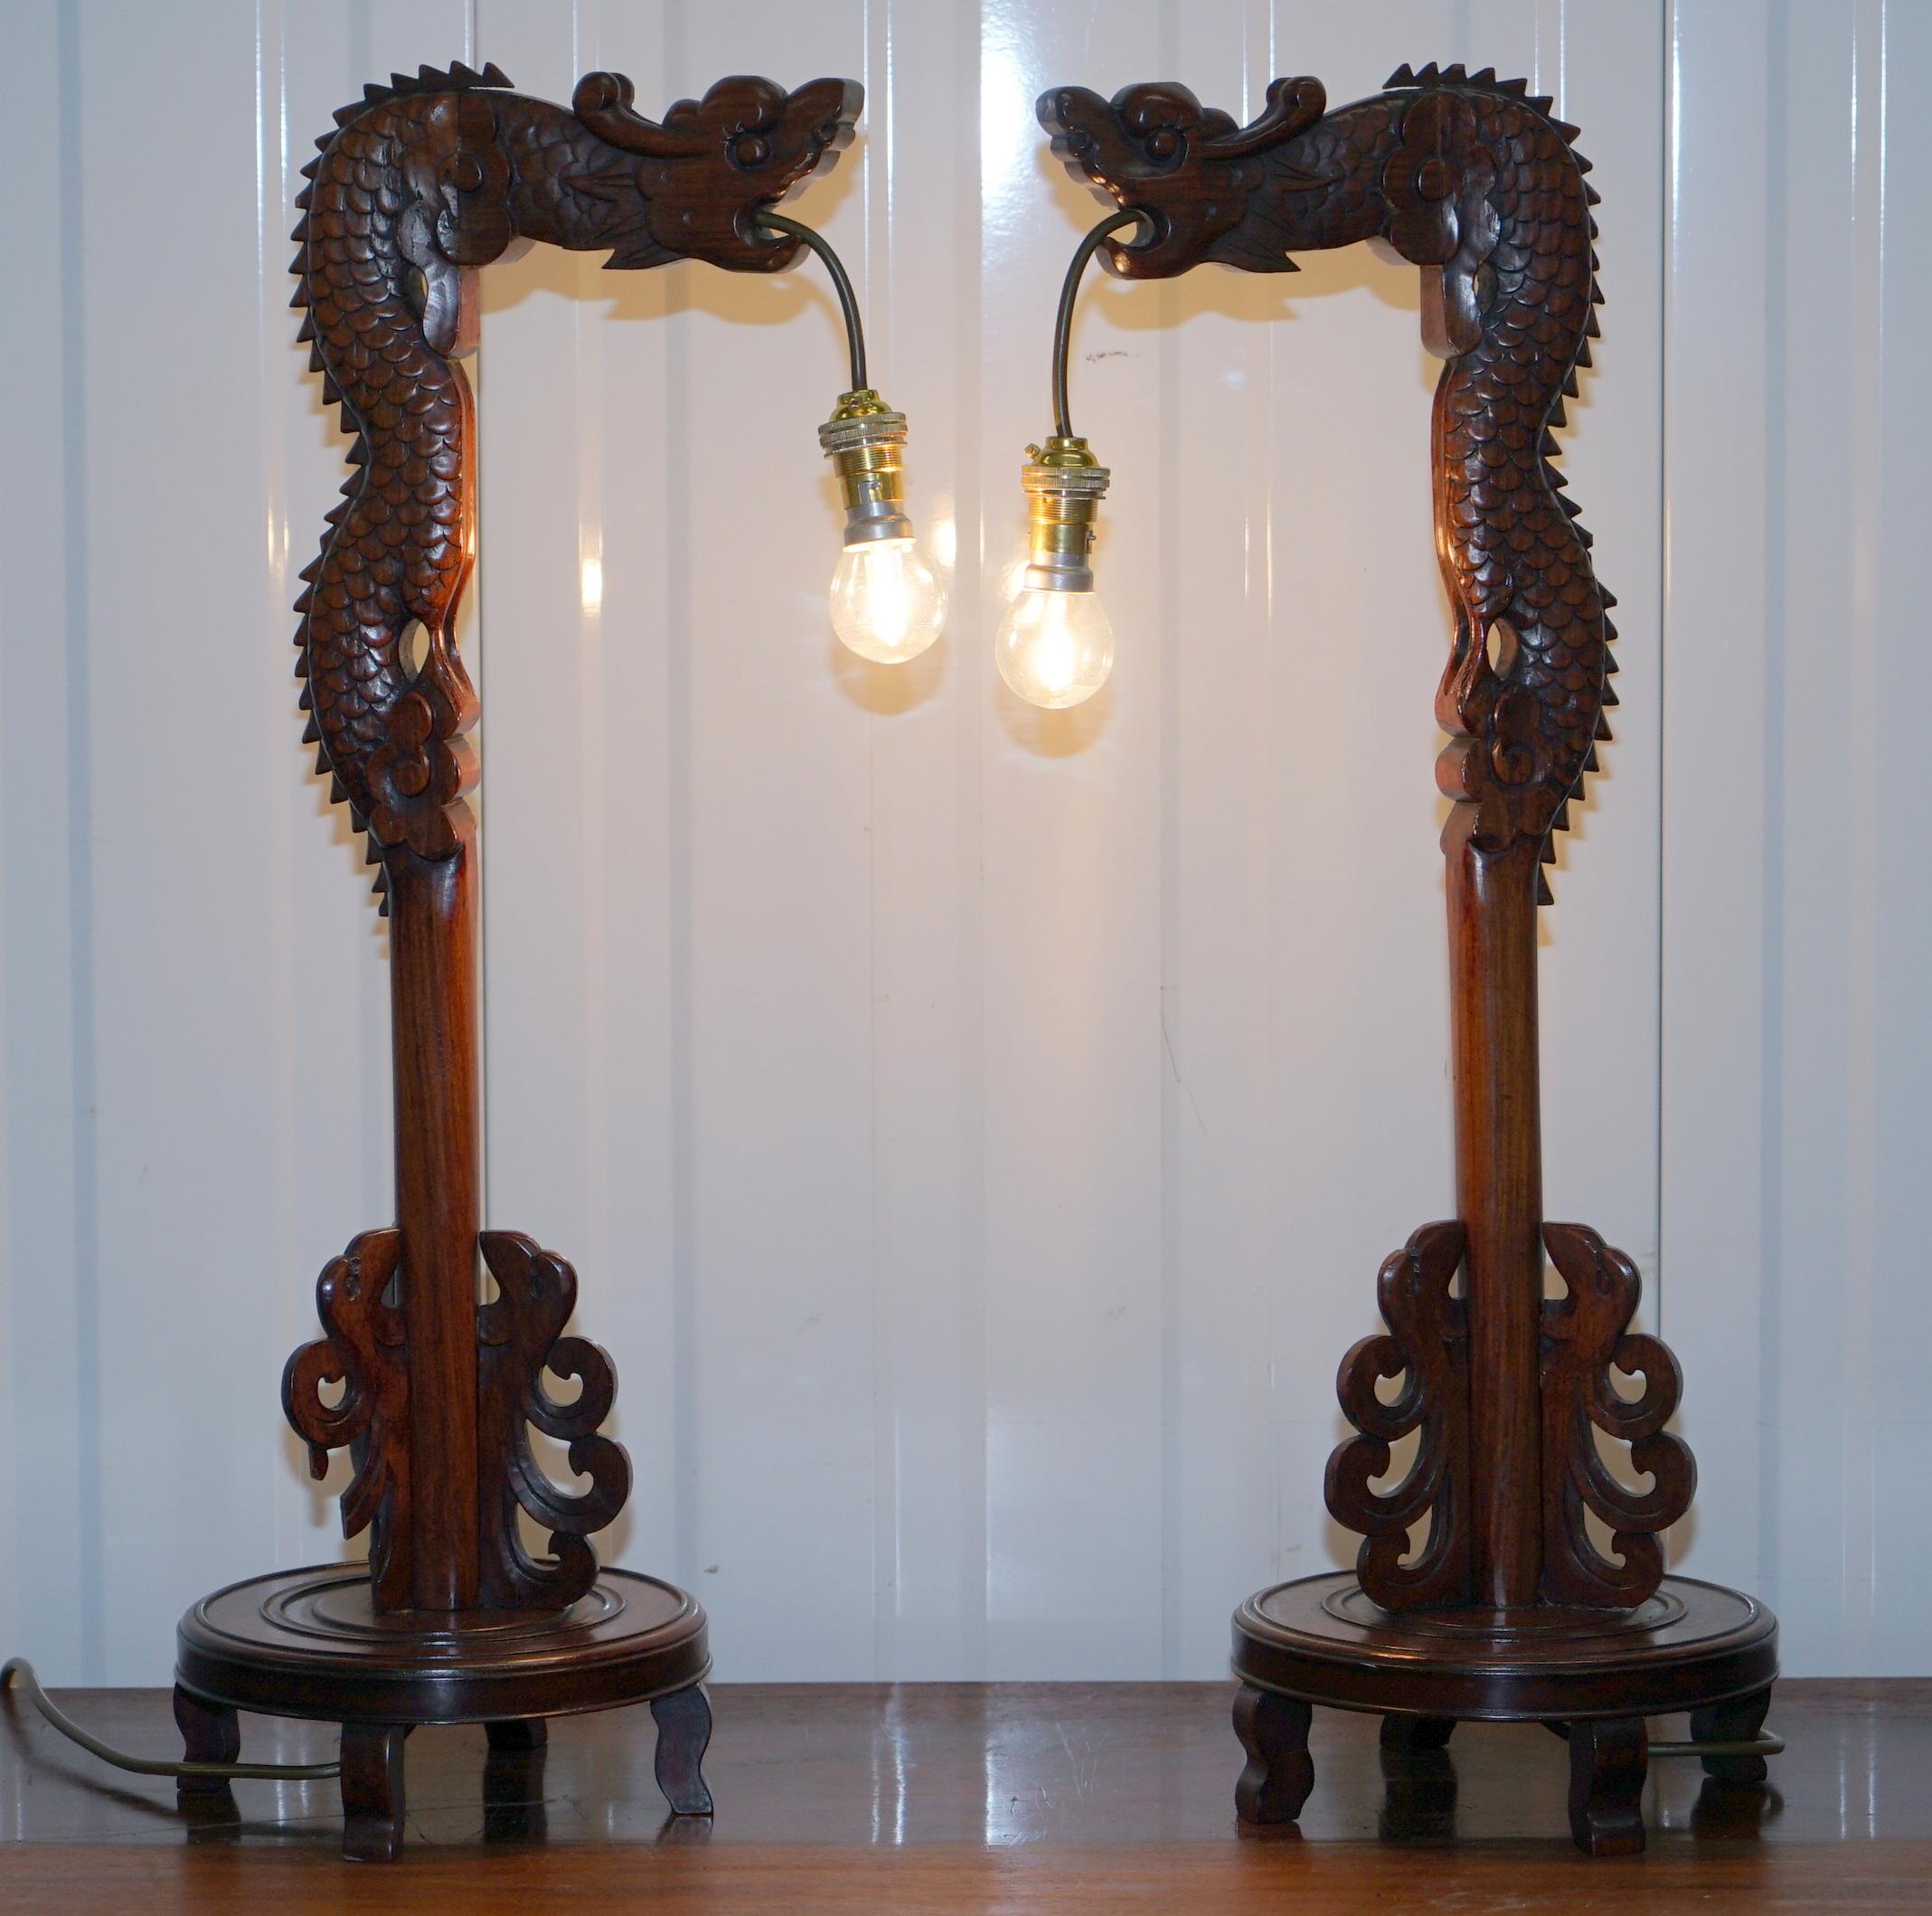 We are delighted to offer for sale this lovely pair of hand carved wood Chinese dragon table lamps

This pair is in lovely restored condition throughout, they have been cleaned waxed and polished, fully rewired with new cables, inline switches and